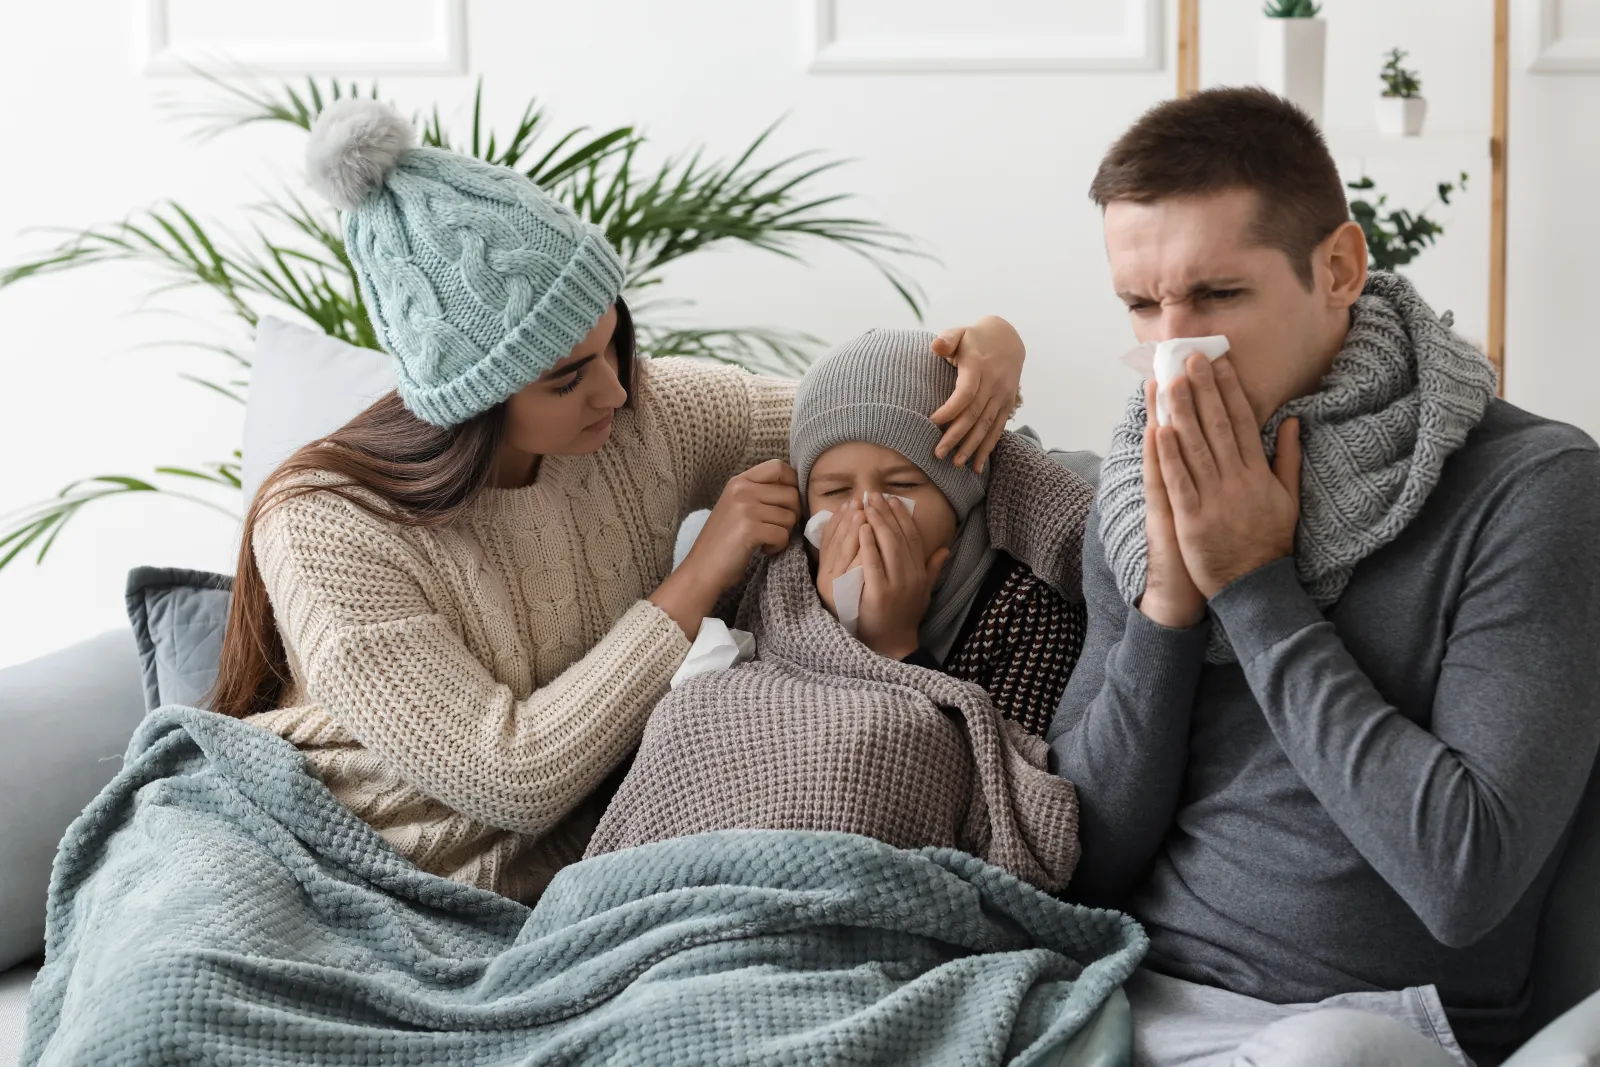 Family with the flu bundles up on the couch with sweaters and blankets